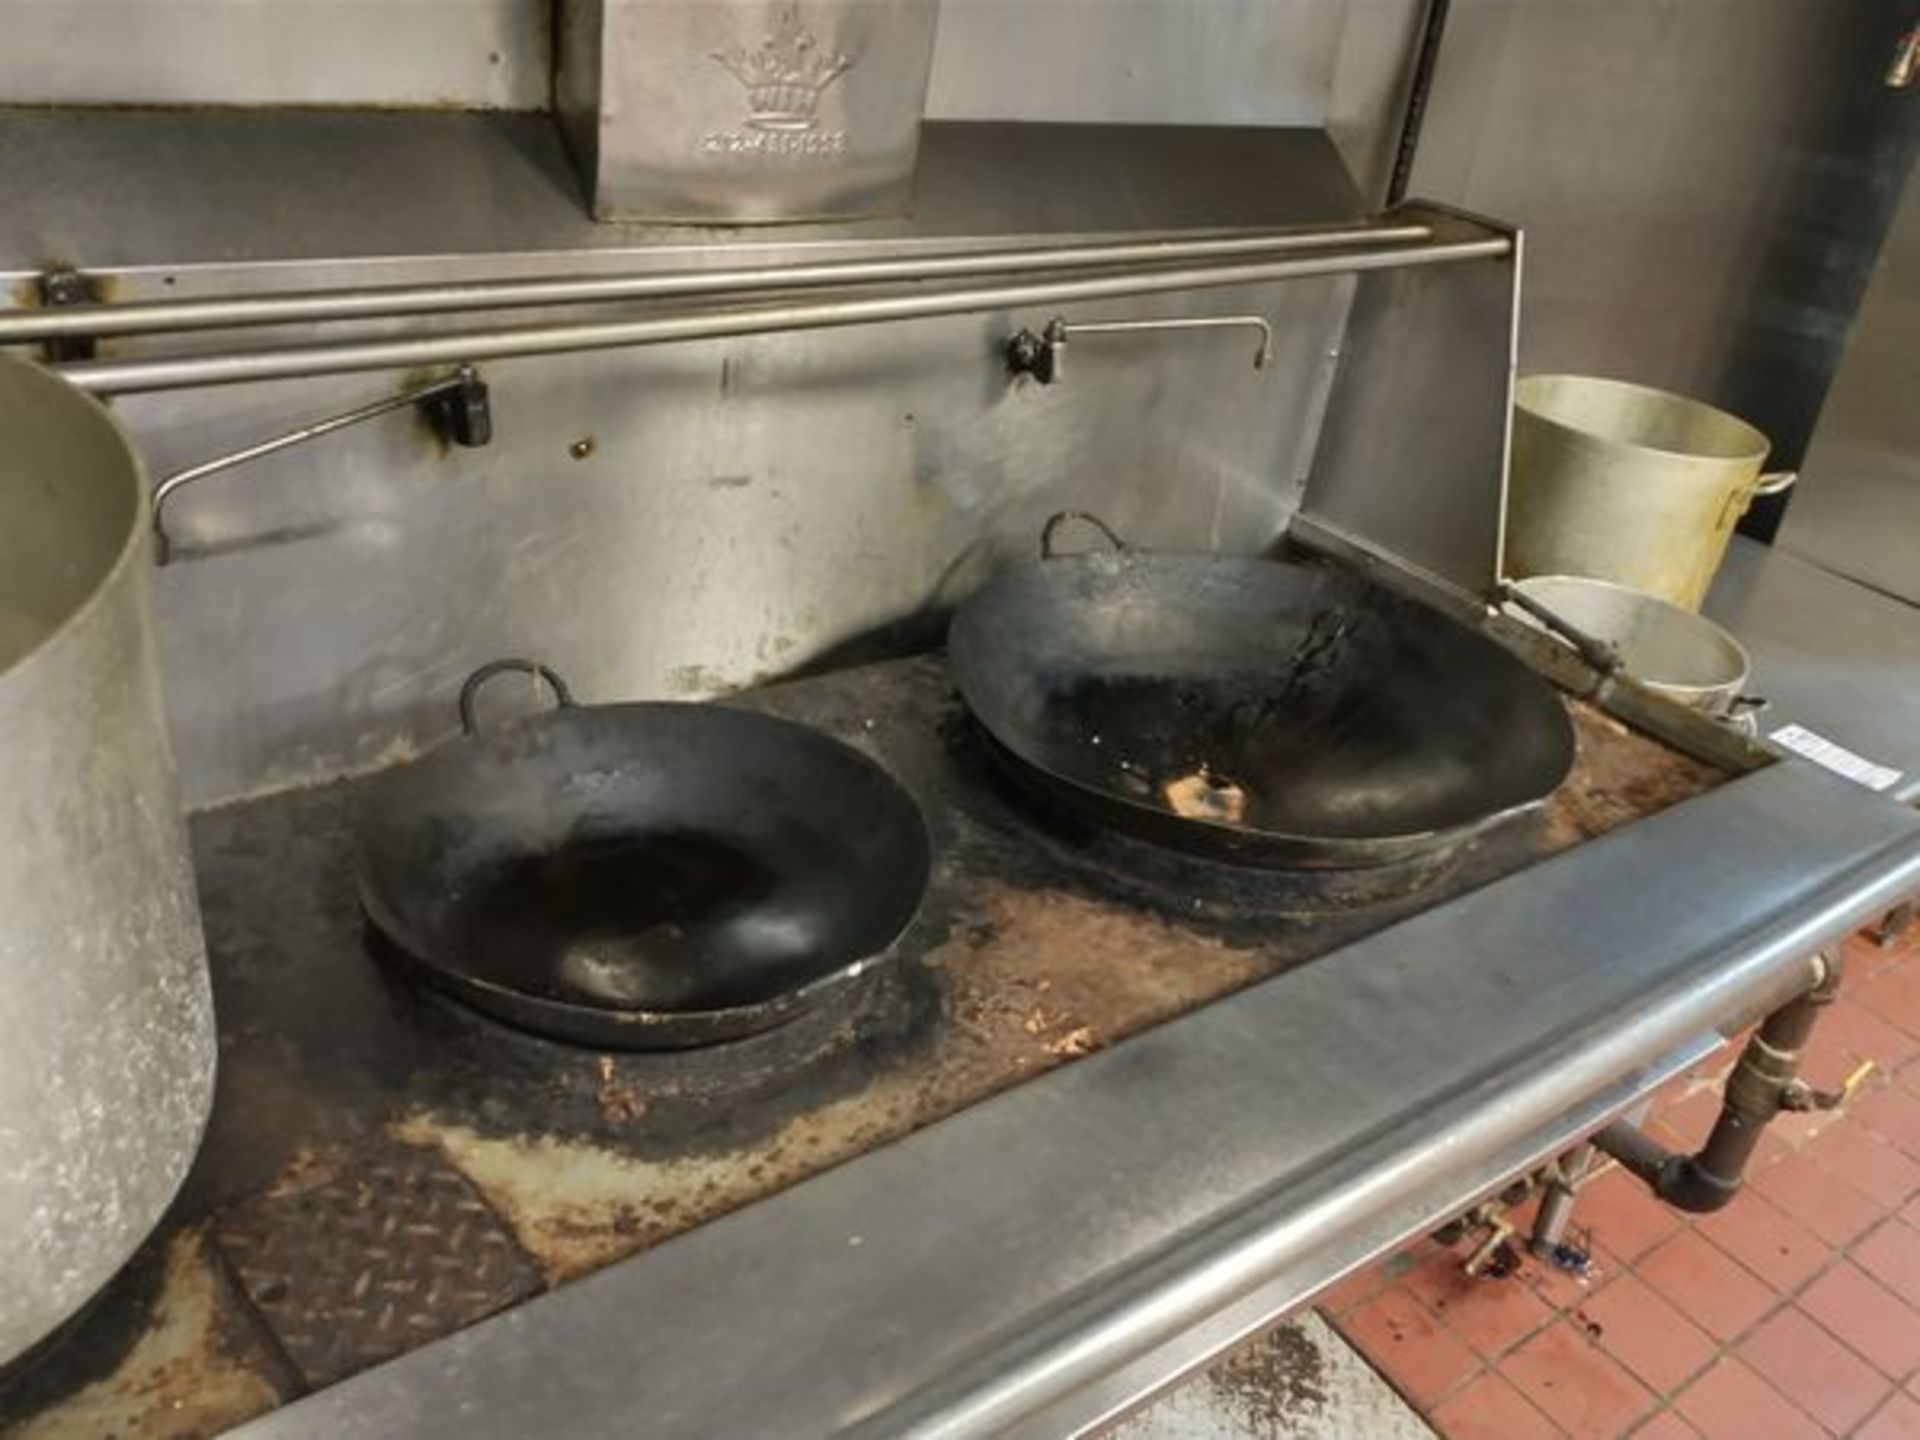 LOT OF 6 WOK COOKING PANS - Image 4 of 4